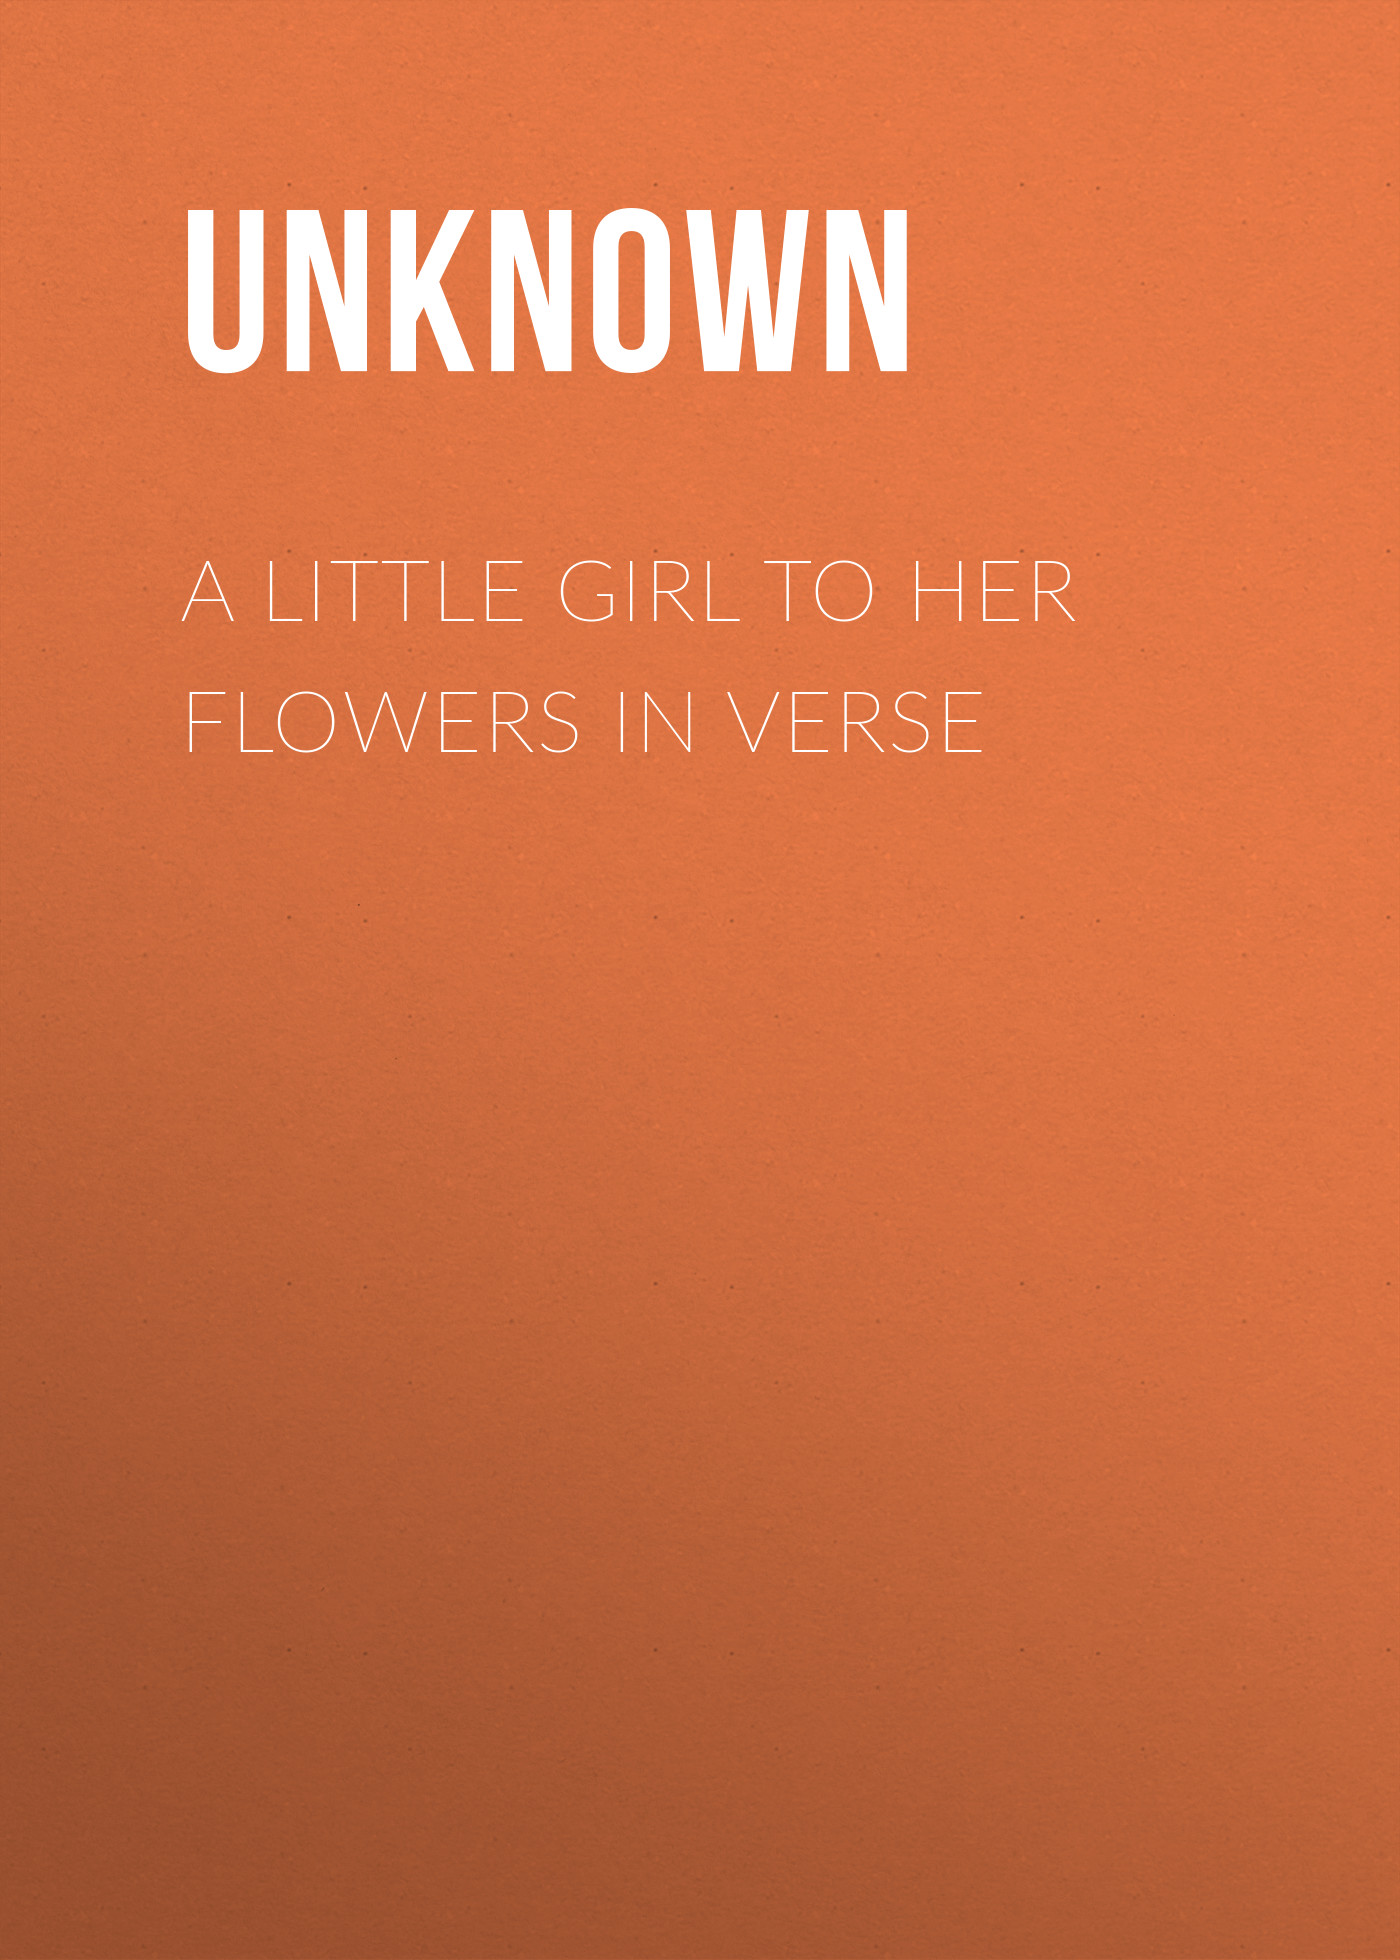 A Little Girl to her Flowers in Verse